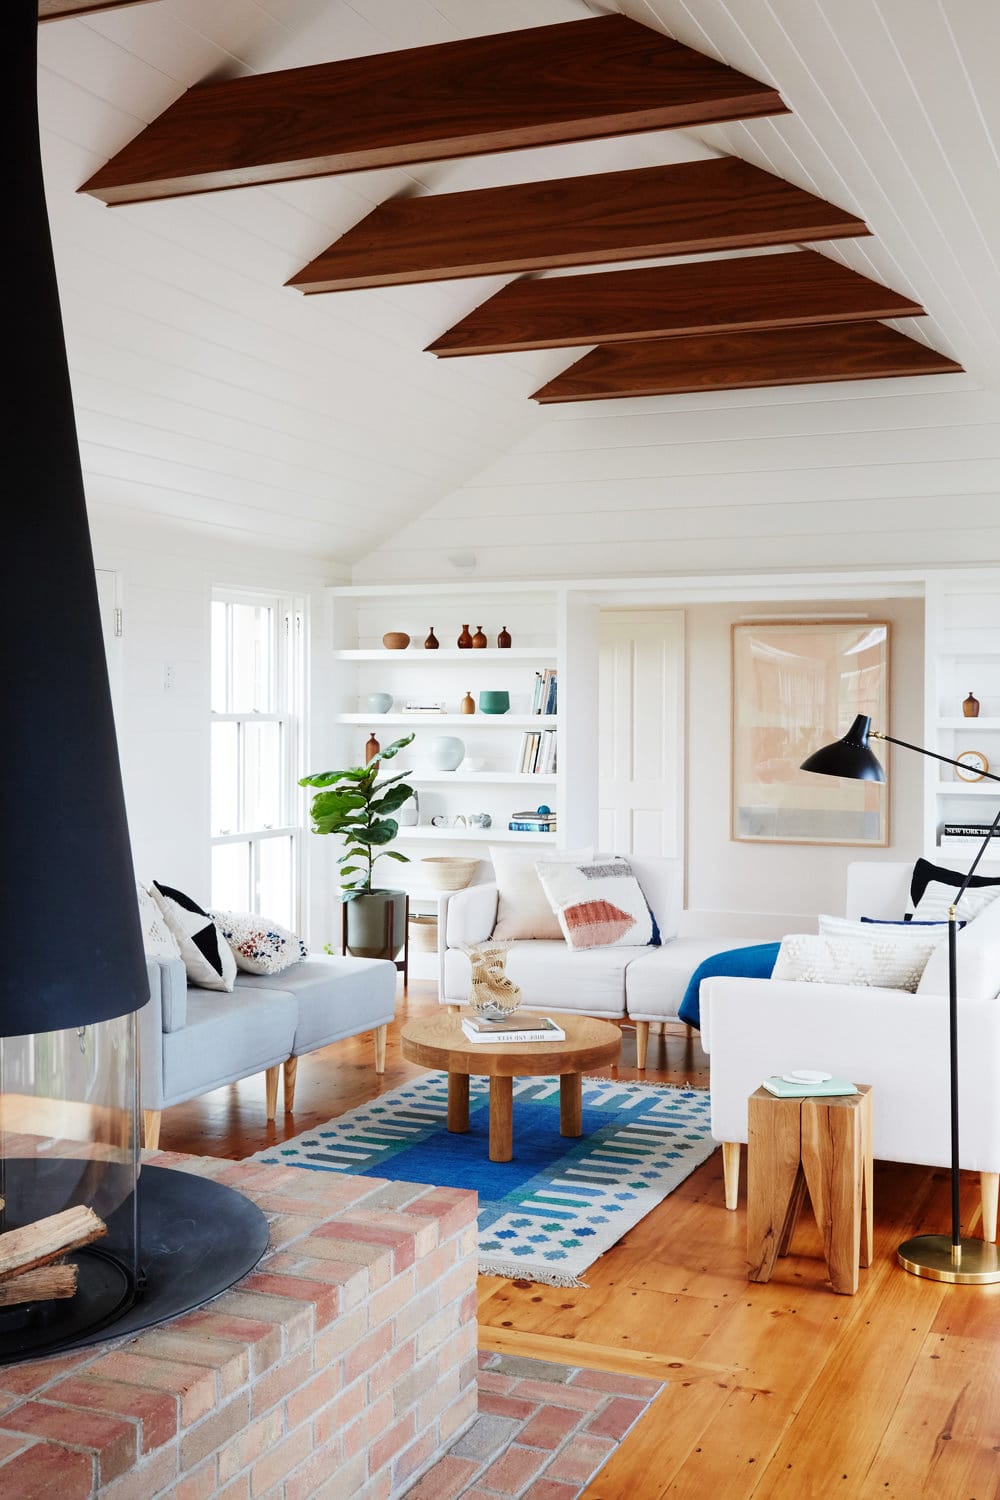 a mid-century style fireplace contrasts the small seating area in this martha's vineyard home | modern shaker beach house tour on coco kelley